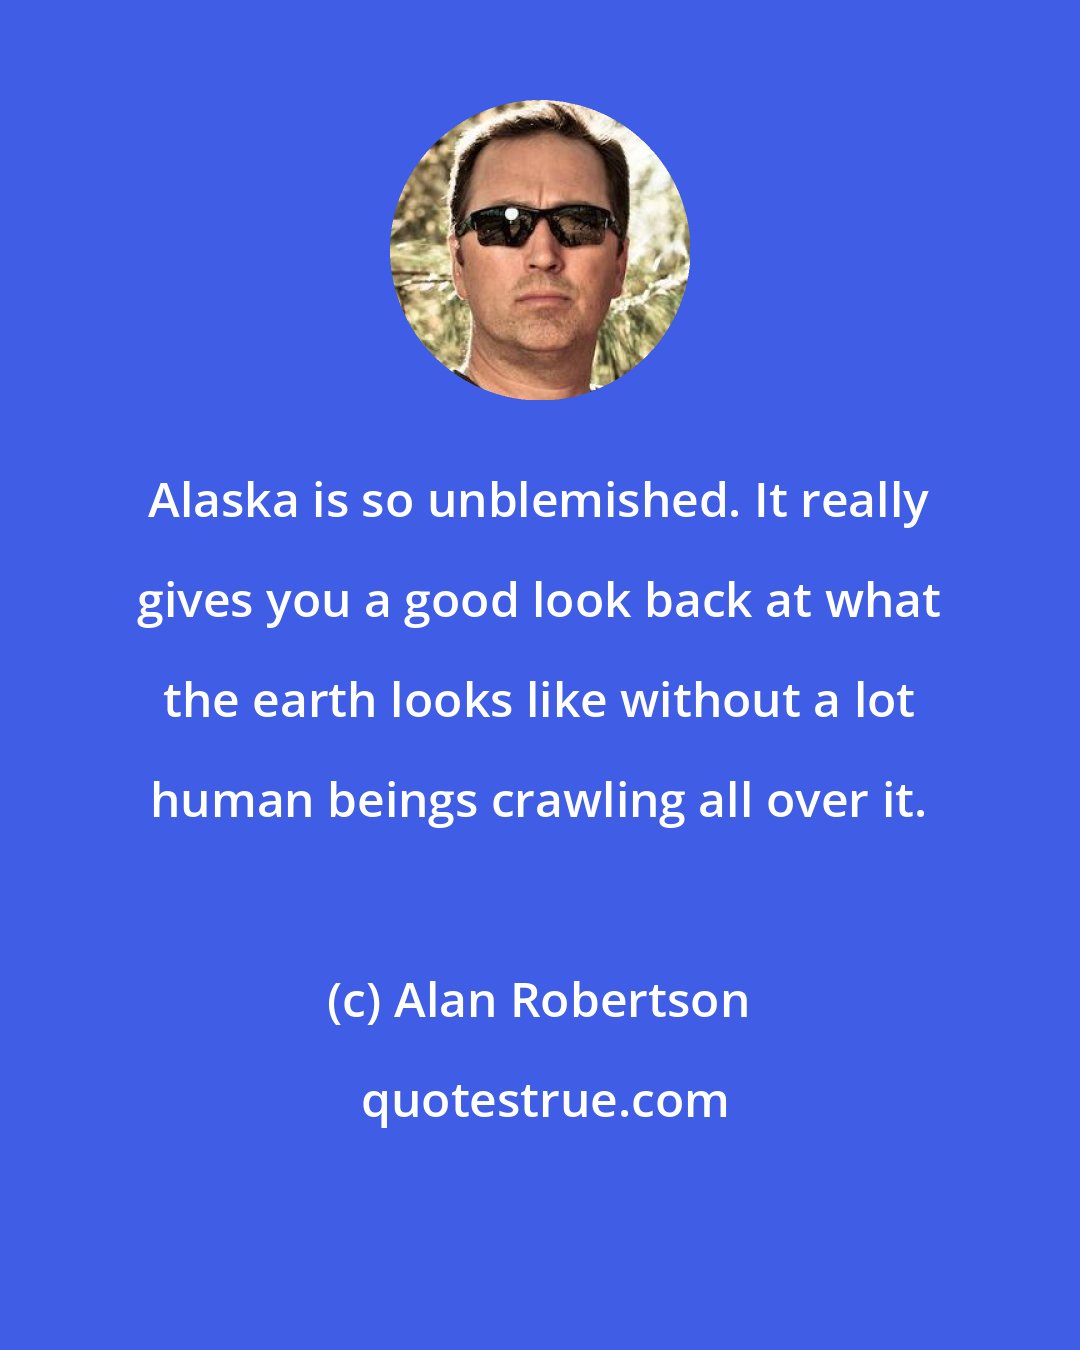 Alan Robertson: Alaska is so unblemished. It really gives you a good look back at what the earth looks like without a lot human beings crawling all over it.